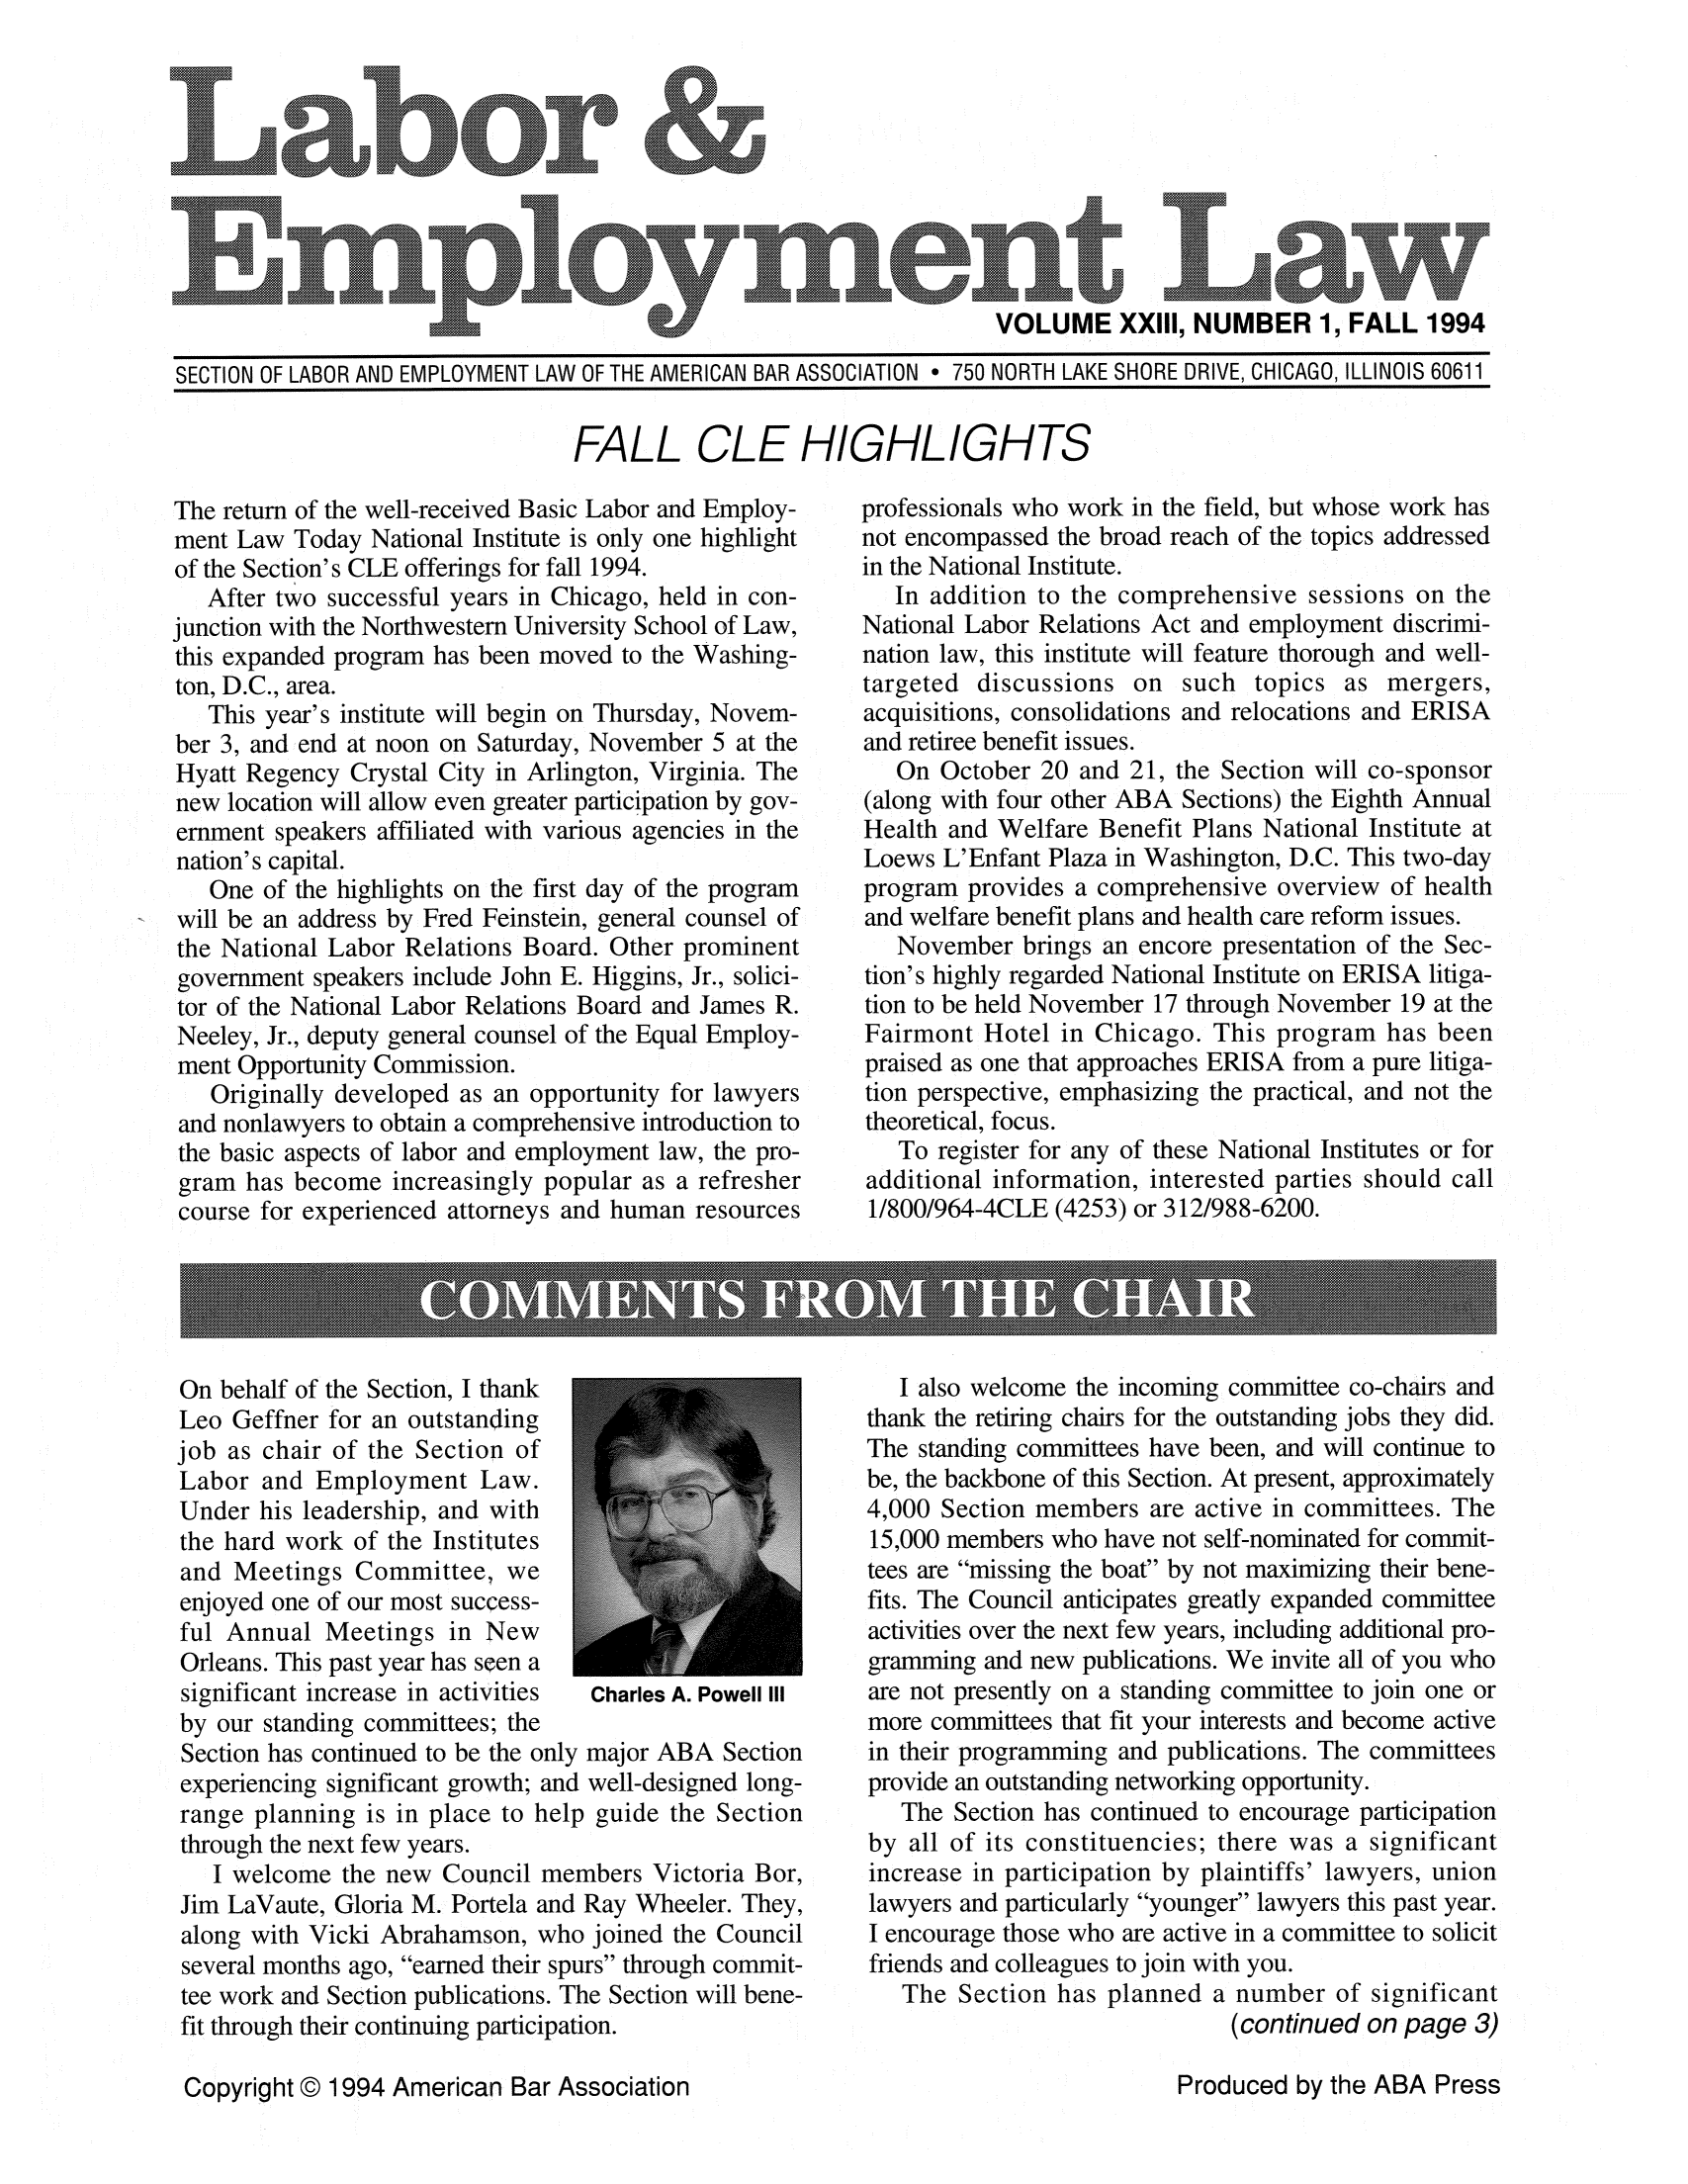 handle is hein.journals/laboemplo23 and id is 1 raw text is:                                                                       VOLUME XXIII, NUMBER 1, FALL 1994SECTION OF LABOR AND EMPLOYMENT LAW OF THE AMERICAN BAR ASSOCIATION * 750 NORTH LAKE SHORE DRIVE, CHICAGO, ILLINOIS 60611FALL CLE HIGHLIGHTSThe return of the well-received Basic Labor and Employ-ment Law Today National Institute is only one highlightof the Section's CLE offerings for fall 1994.   After two successful years in Chicago, held in con-junction with the Northwestern University School of Law,this expanded program has been moved to the Washing-ton, D.C., area.   This year's institute will begin on Thursday, Novem-ber 3, and end at noon on Saturday, November 5 at theHyatt Regency Crystal City in Arlington, Virginia. Thenew location will allow even greater participation by gov-ernment speakers affiliated with various agencies in thenation's capital.   One of the highlights on the first day of the programwill be an address by Fred Feinstein, general counsel ofthe National Labor Relations Board. Other prominentgovernment speakers include John E. Higgins, Jr., solici-tor of the National Labor Relations Board and James R.Neeley, Jr., deputy general counsel of the Equal Employ-ment Opportunity Commission.   Originally developed as an opportunity for lawyers and nonlawyers to obtain a comprehensive introduction to the basic aspects of labor and employment law, the pro- gram has become increasingly popular as a refresher course for experienced attorneys and human resourcesOn behalf of the Section, I thankLeo Geffner for an outstandingjob as chair of the Section ofLabor and Employment Law.Under his leadership, and withthe hard work of the Institutesand Meetings Committee, weenjoyed one of our most success-ful Annual Meetings in NewOrleans. This past year has seen asignificant increase in activities Charles A. Powell IIIby our standing committees; theSection has continued to be the only major ABA Sectionexperiencing significant growth; and well-designed long-range planning is in place to help guide the Sectionthrough the next few years.   I welcome the new Council members Victoria Bor,Jim LaVaute, Gloria M. Portela and Ray Wheeler. They,along with Vicki Abrahamson, who joined the Councilseveral months ago, earned their spurs through commit-tee work and Section publications. The Section will bene-fit through their continuing participation.Copyright @ 1994 American Bar Associationprofessionals who work in the field, but whose work hasnot encompassed the broad reach of the topics addressedin the National Institute.   In addition to the comprehensive sessions on theNational Labor Relations Act and employment discrimi-nation law, this institute will feature thorough and well-targeted discussions on such topics as mergers,acquisitions, consolidations and relocations and ERISAand retiree benefit issues.   On October 20 and 21, the Section will co-sponsor(along with four other ABA Sections) the Eighth AnnualHealth and Welfare Benefit Plans National Institute atLoews L'Enfant Plaza in Washington, D.C. This two-dayprogram provides a comprehensive overview of healthand welfare benefit plans and health care reform issues.   November brings an encore presentation of the Sec-tion's highly regarded National Institute on ERISA litiga-tion to be held November 17 through November 19 at theFairmont Hotel in Chicago. This program has beenpraised as one that approaches ERISA from a pure litiga-tion perspective, emphasizing the practical, and not thetheoretical, focus.   To register for any of these National Institutes or foradditional information, interested parties should call1/800/964-4CLE (4253) or 312/988-6200.   I also welcome the incoming committee co-chairs andthank the retiring chairs for the outstanding jobs they did.The standing committees have been, and will continue tobe, the backbone of this Section. At present, approximately4,000 Section members are active in committees. The15,000 members who have not self-nominated for commit-tees are missing the boat by not maximizing their bene-fits. The Council anticipates greatly expanded committeeactivities over the next few years, including additional pro-gramming and new publications. We invite all of you whoare not presently on a standing committee to join one ormore committees that fit your interests and become activein their programming and publications. The committeesprovide an outstanding networking opportunity.   The Section has continued to encourage participationby all of its constituencies; there was a significantincrease in participation by plaintiffs' lawyers, unionlawyers and particularly younger lawyers this past year.I encourage those who are active in a committee to solicitfriends and colleagues to join with you.   The Section has planned a number of significant                               (continued on page 3)Produced by the ABA Press                    . .... .  . .. ...                        ..     . ........ ......                      . ... ............. ..                ..        ........ .....                                  .. .. .......             ol